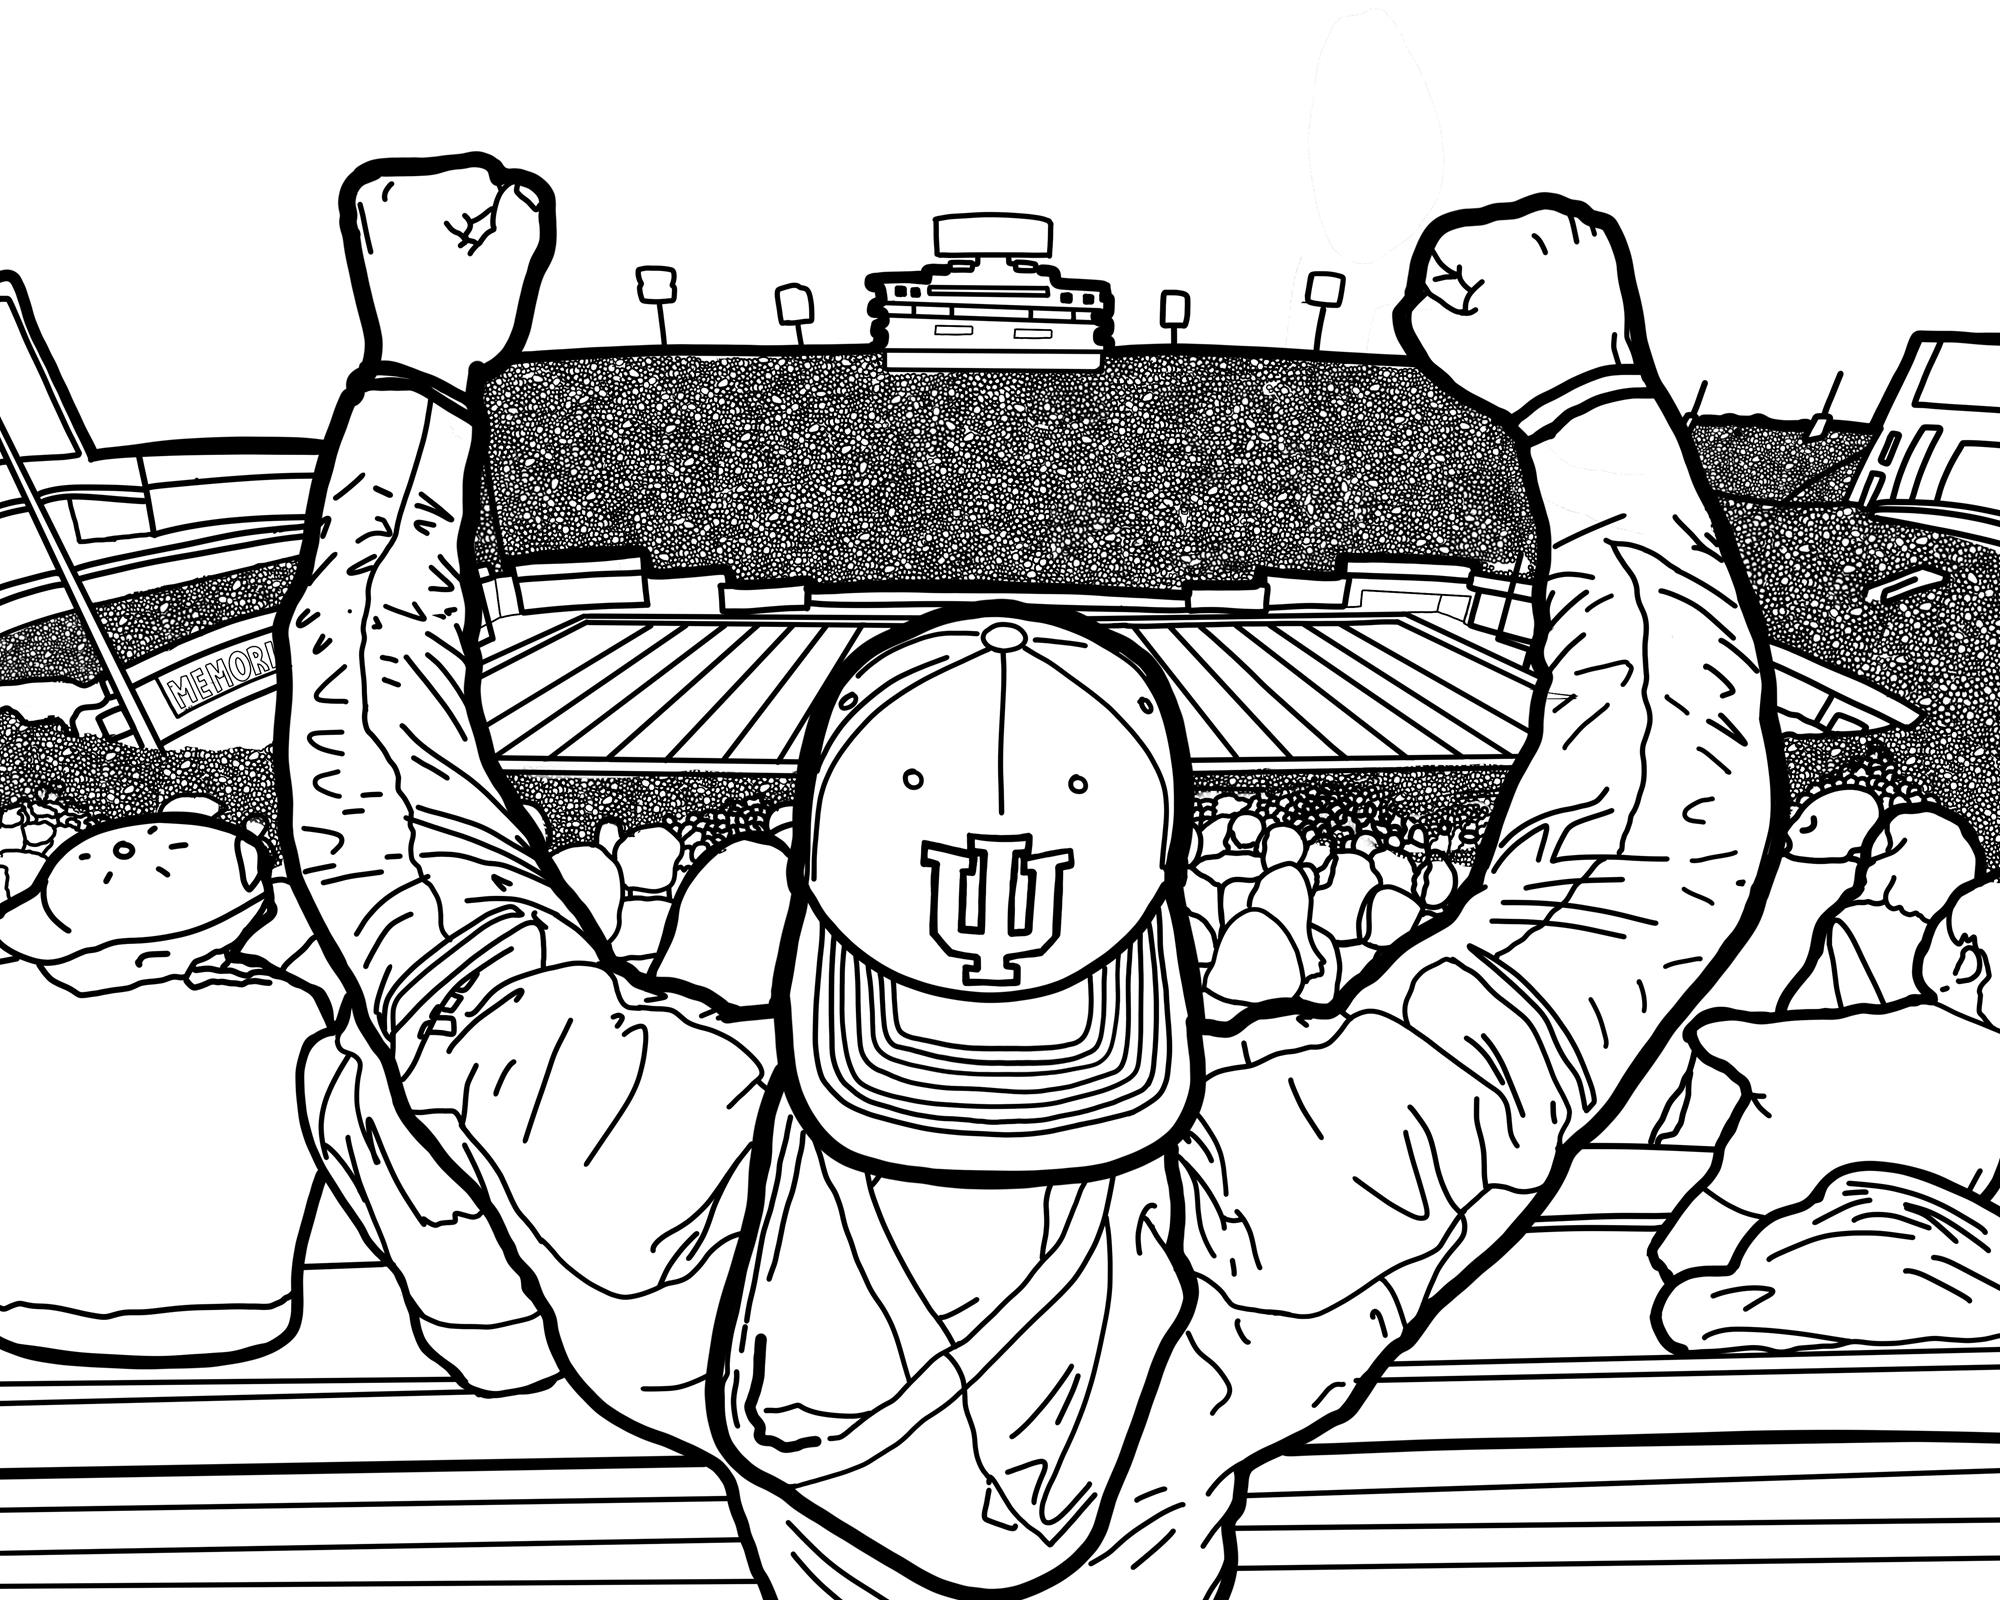 Coloring Pages - Indiana University Athletics